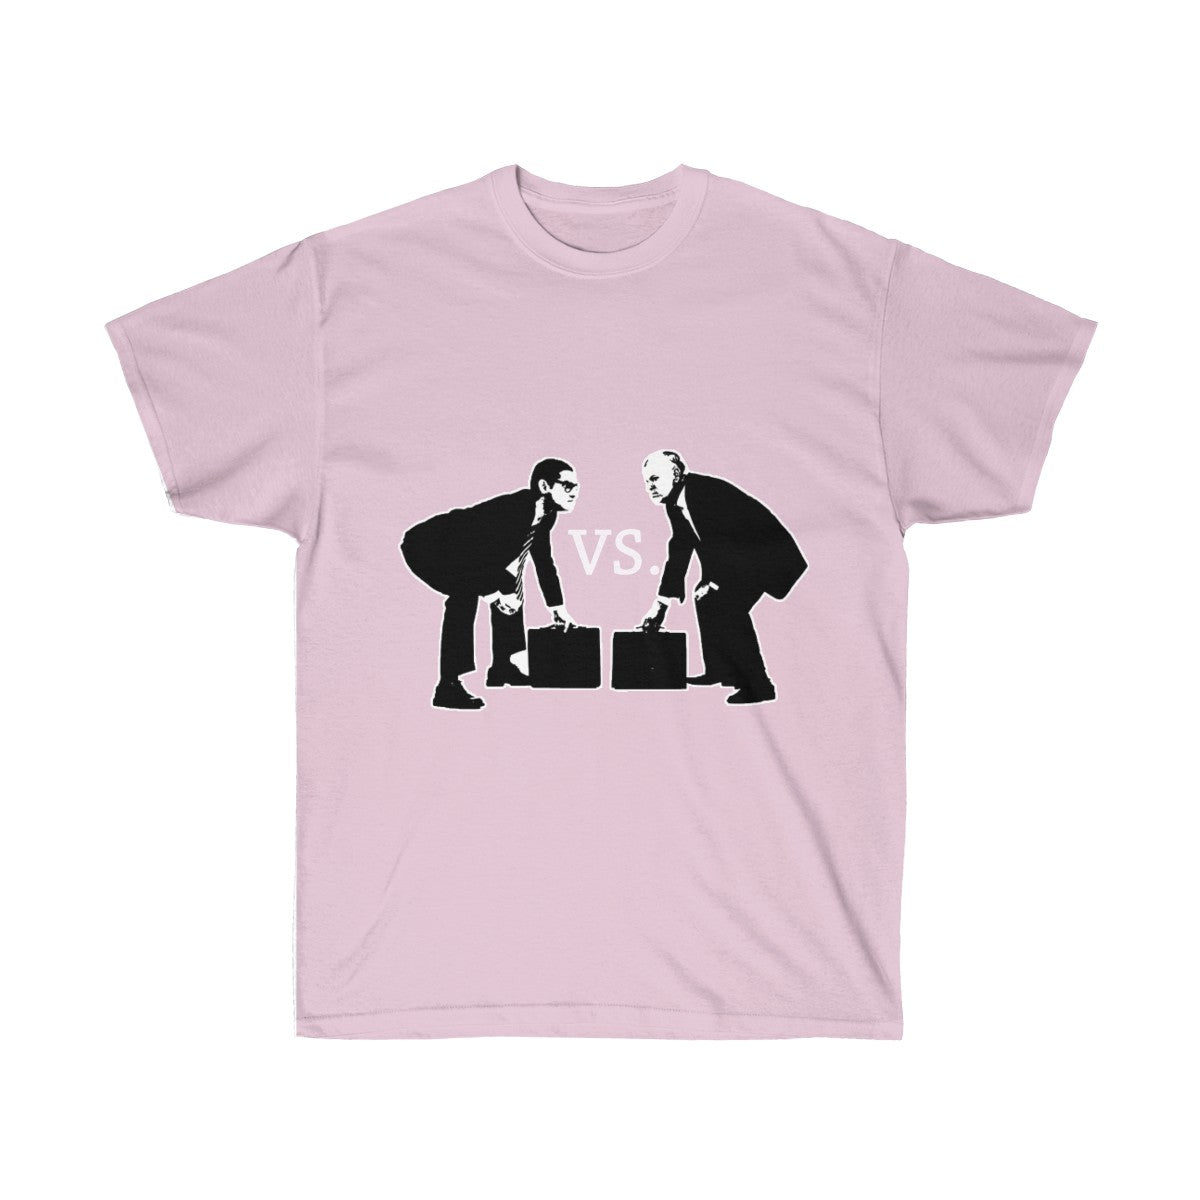 My Lawyer Can Beat Up Your Lawyer Face Off Versus Funny Legal Humor Tee